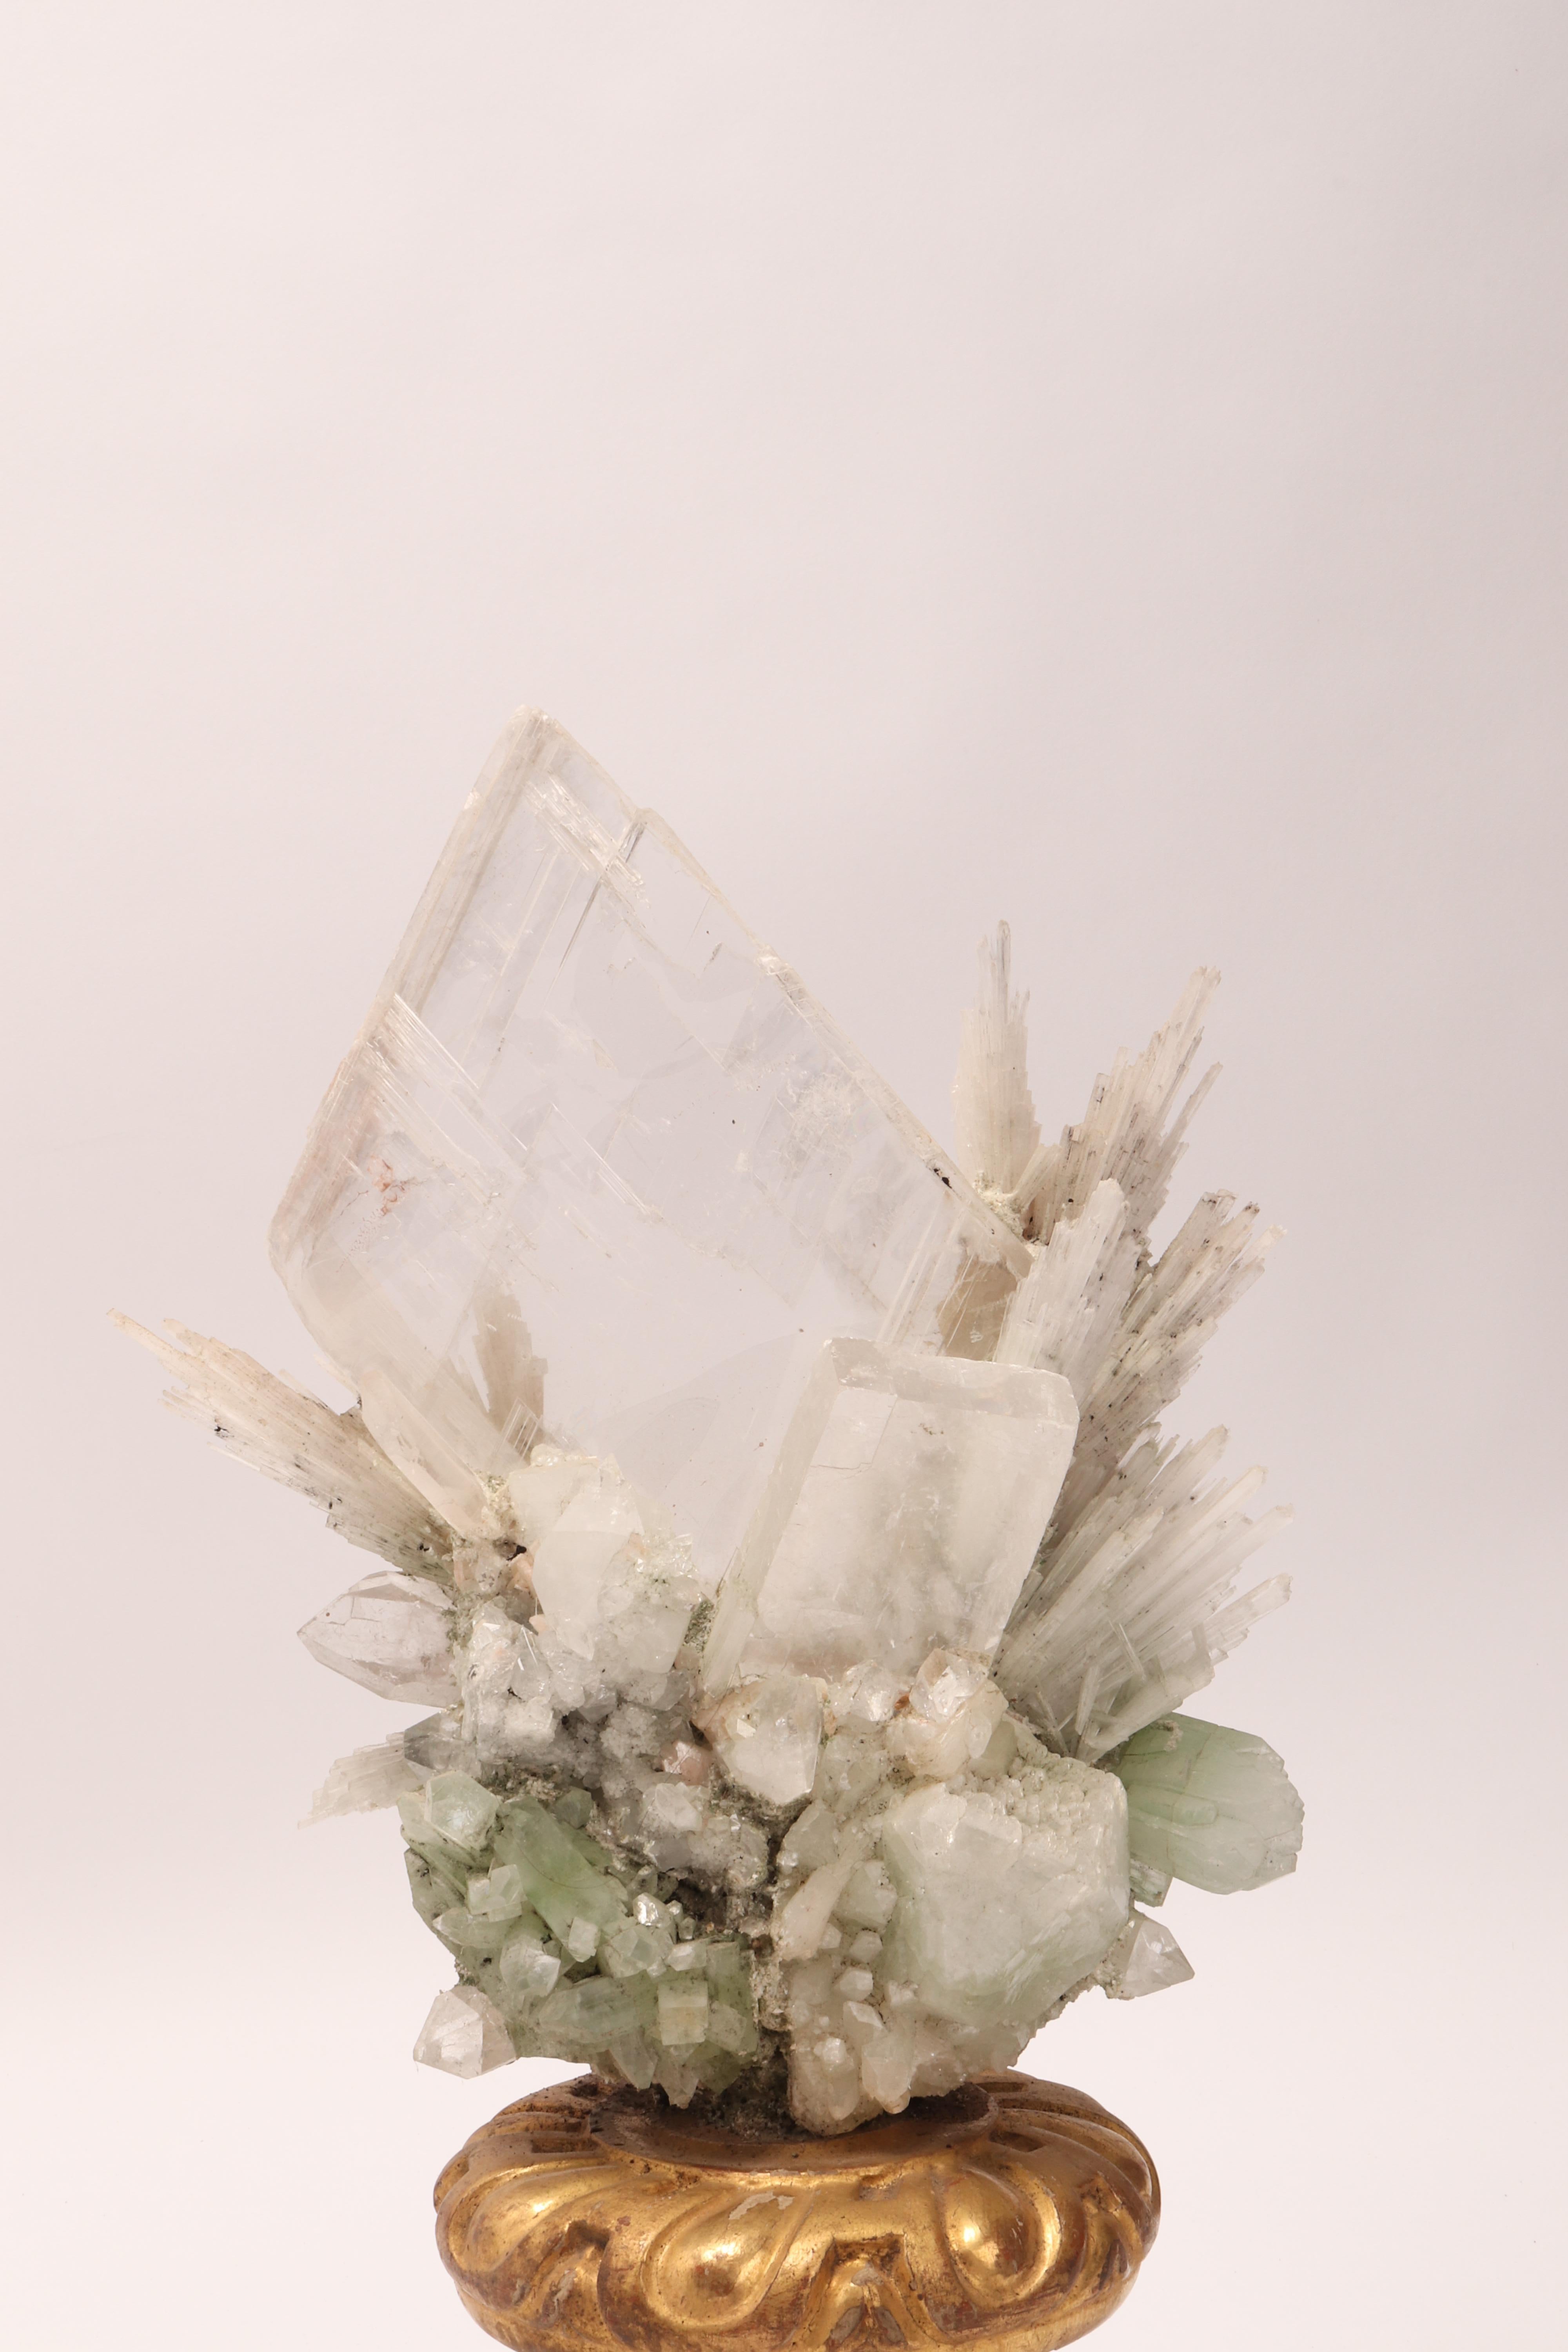 A Naturalia mineral specimen. A Druze of apophyllite, quartz, colacyte, and calcite flowers crystals, mounted over a guild-plated wooden base on a vase shape, Italy, circa 1880.